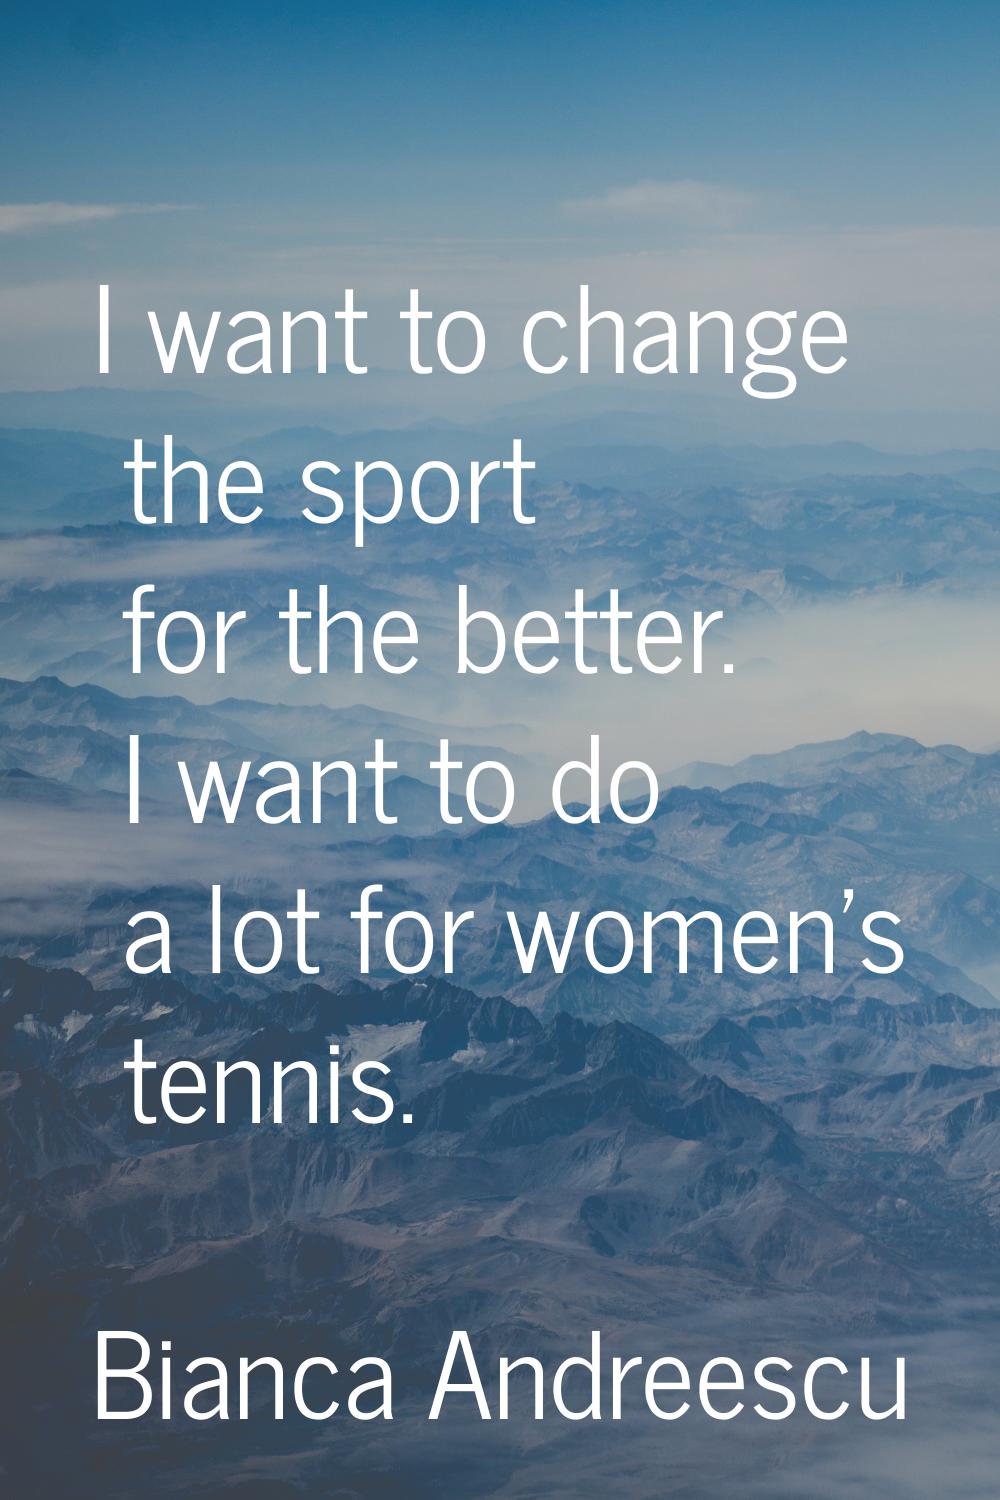 I want to change the sport for the better. I want to do a lot for women's tennis.